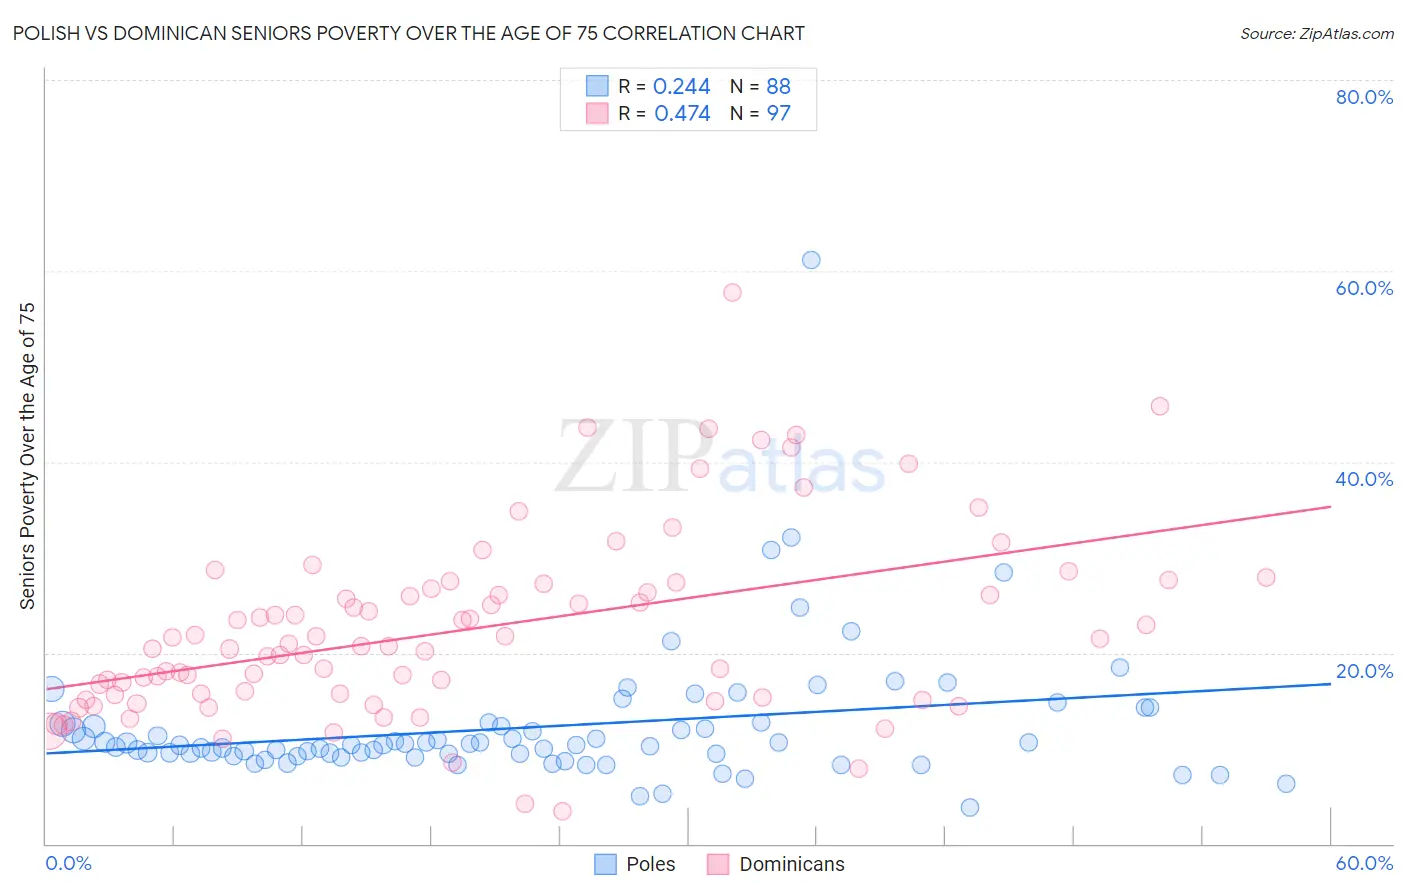 Polish vs Dominican Seniors Poverty Over the Age of 75